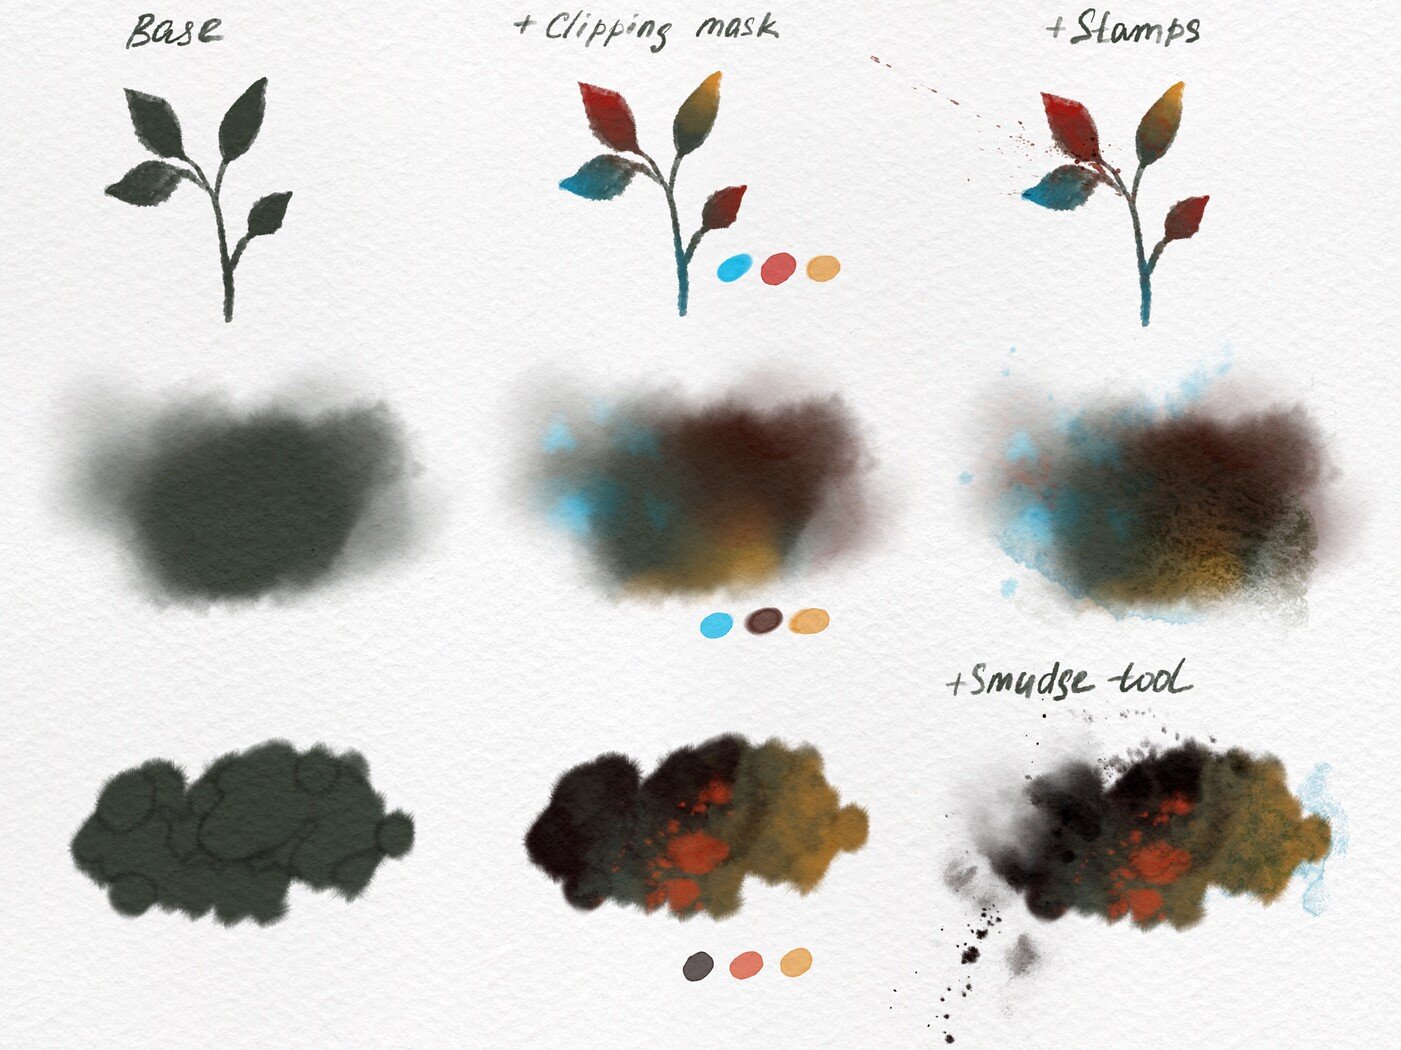 Procreate Watercolor Brushes + Paper Textures